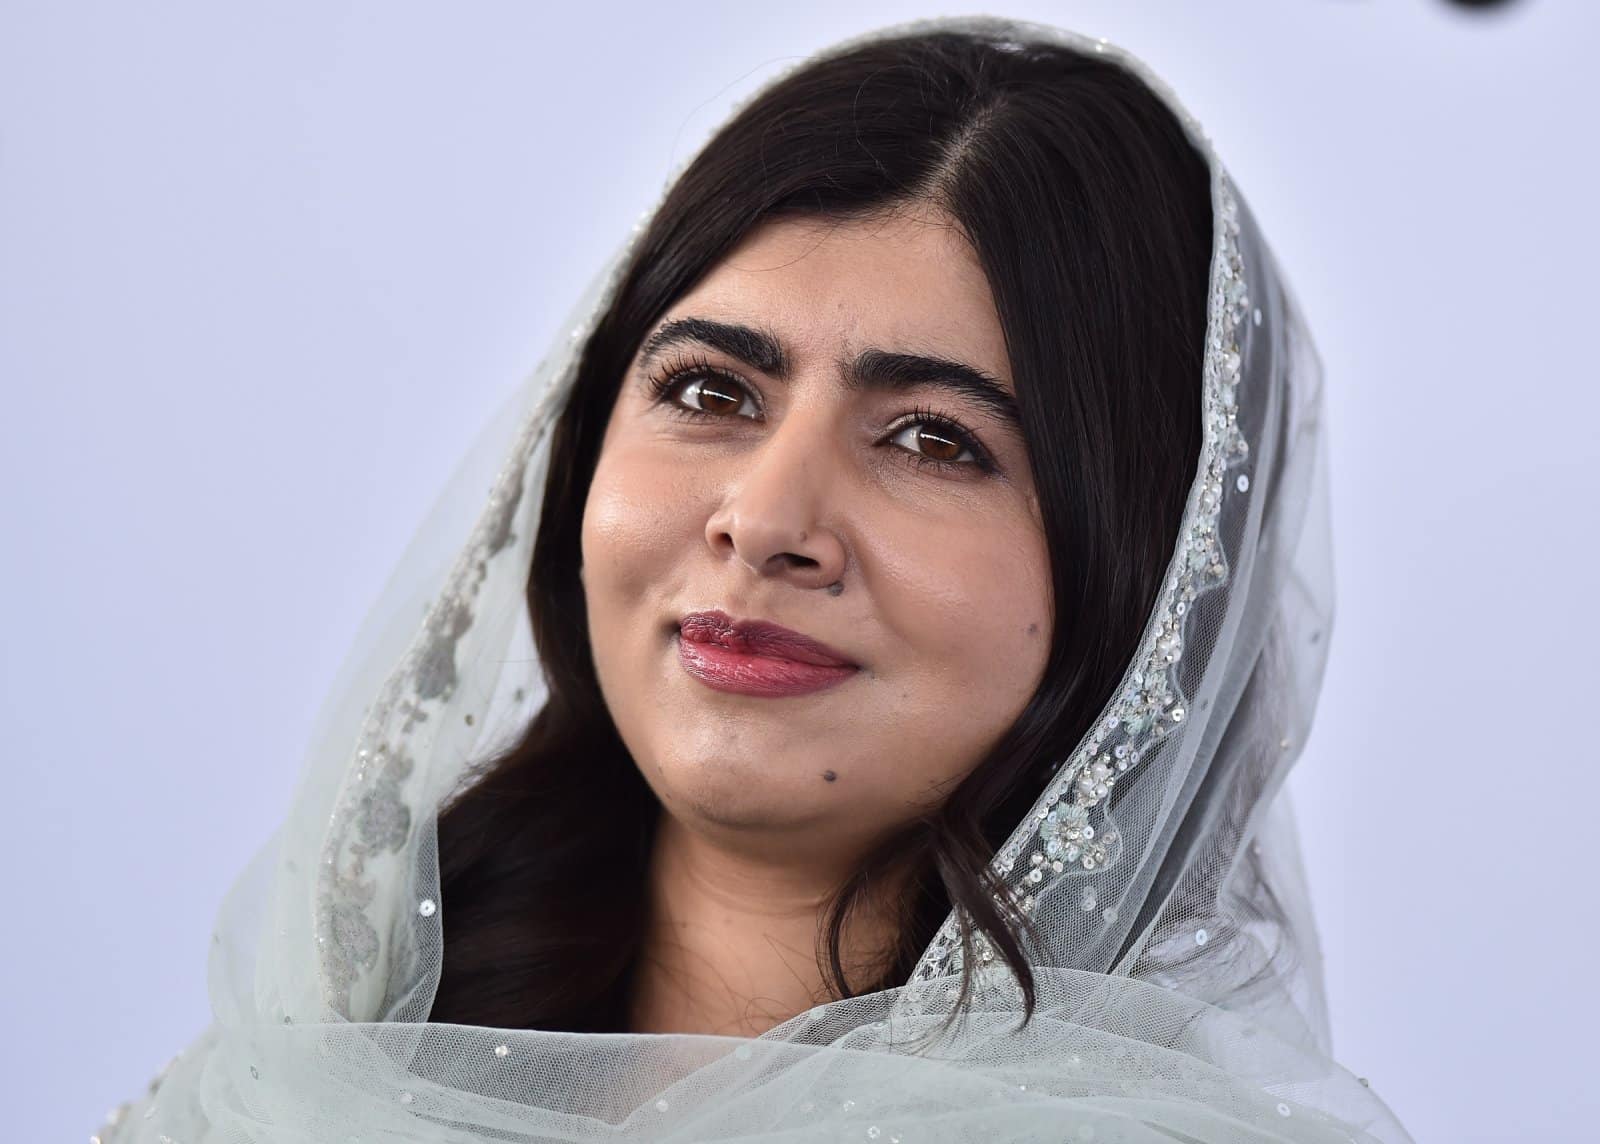 Image Credit: Shutterstock / DFree <p><span>Malala’s speech highlights her unwavering commitment to education and girls’ rights, emphasizing the transformative power of education in empowering young women to create change.</span></p>